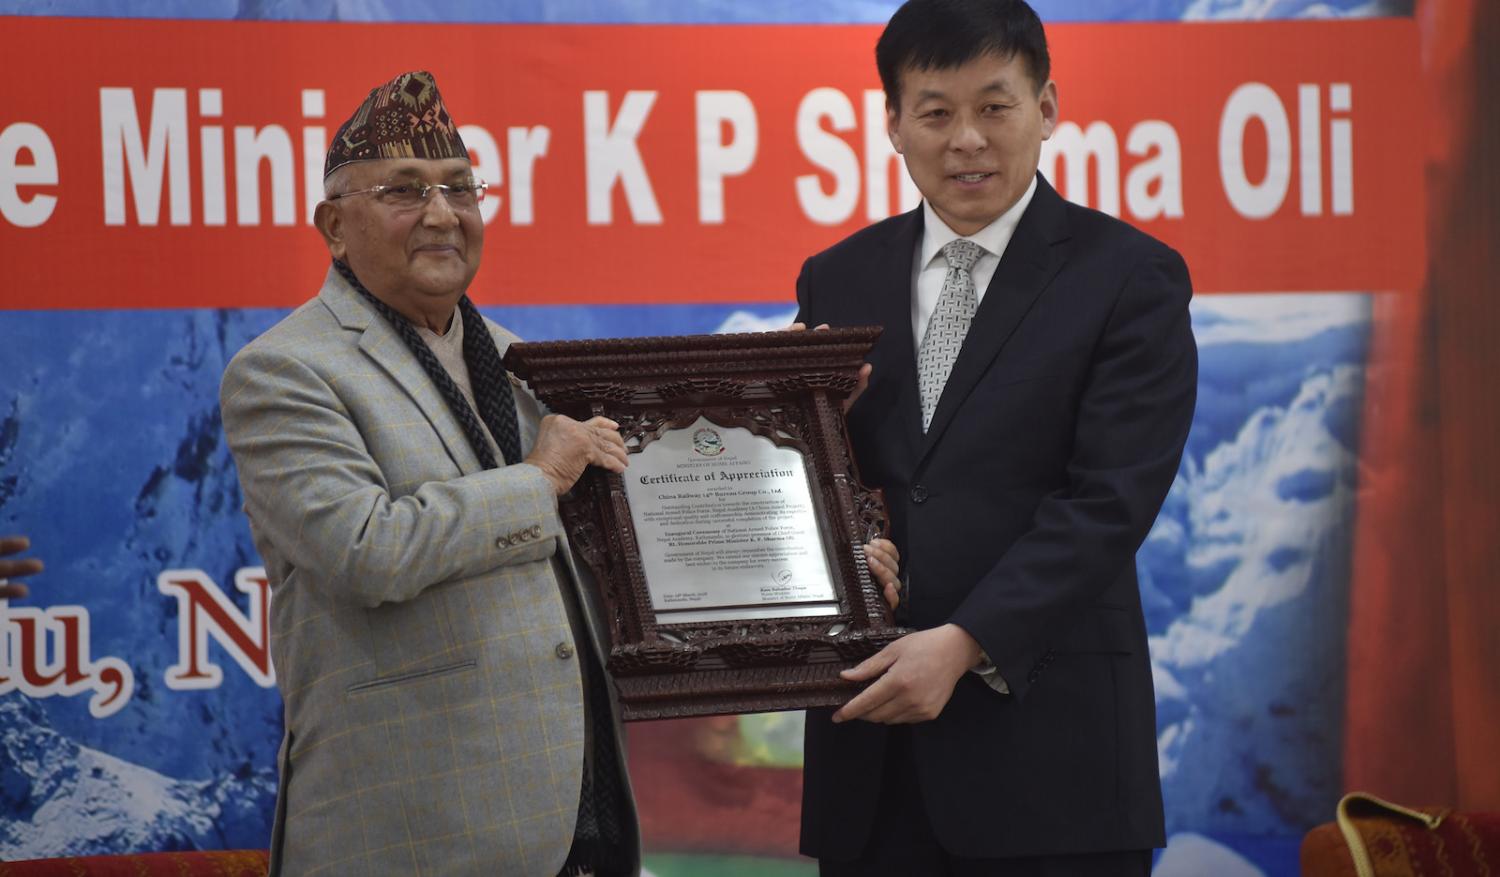 Prime Minister of Nepal KP Sharma Oli giving Certificate of Appreciation to the member of China Railway 14th Bureau Group (Photo: Photo by Narayan Maharjan via Getty)